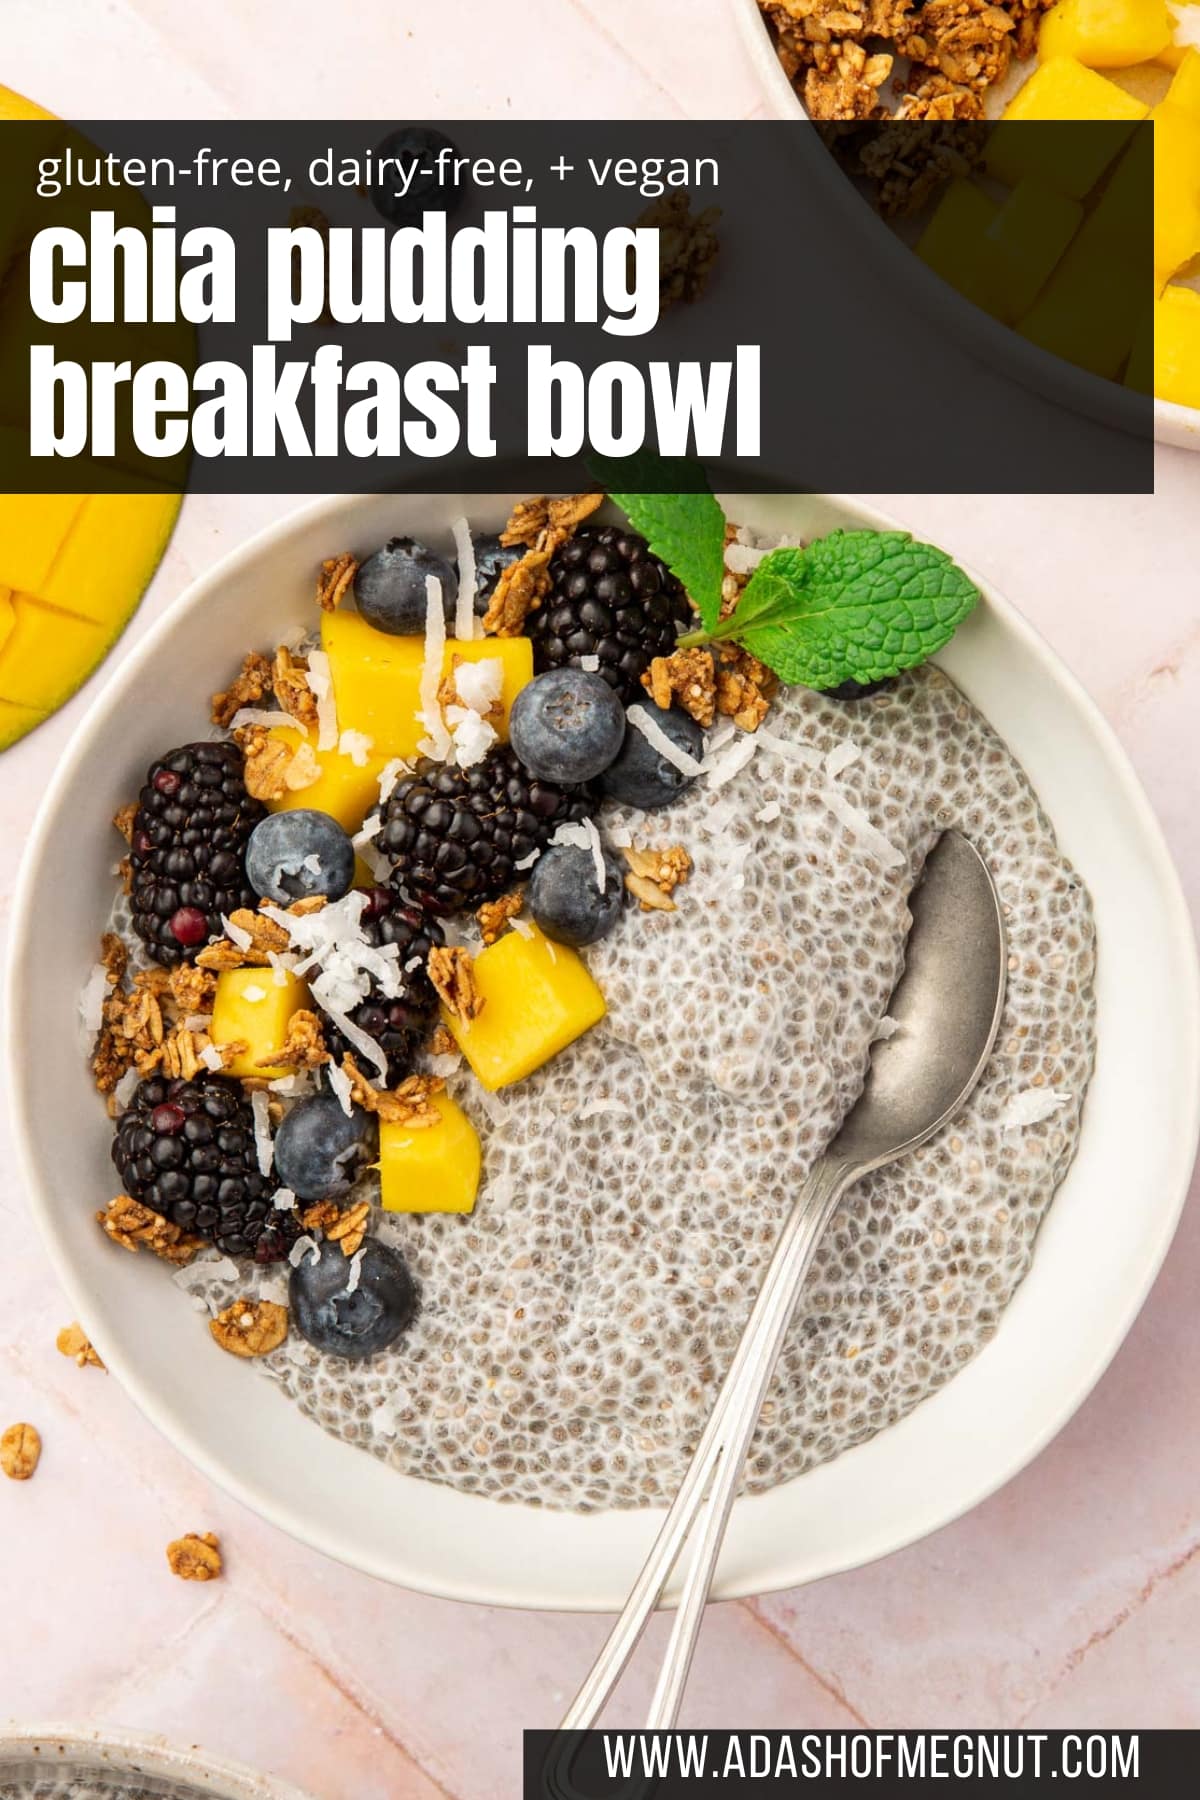 A chia pudding breakfast bowl with blackberries, mango, blueberries, coconut, granola and a mint leaf with a spoon in the bowl.